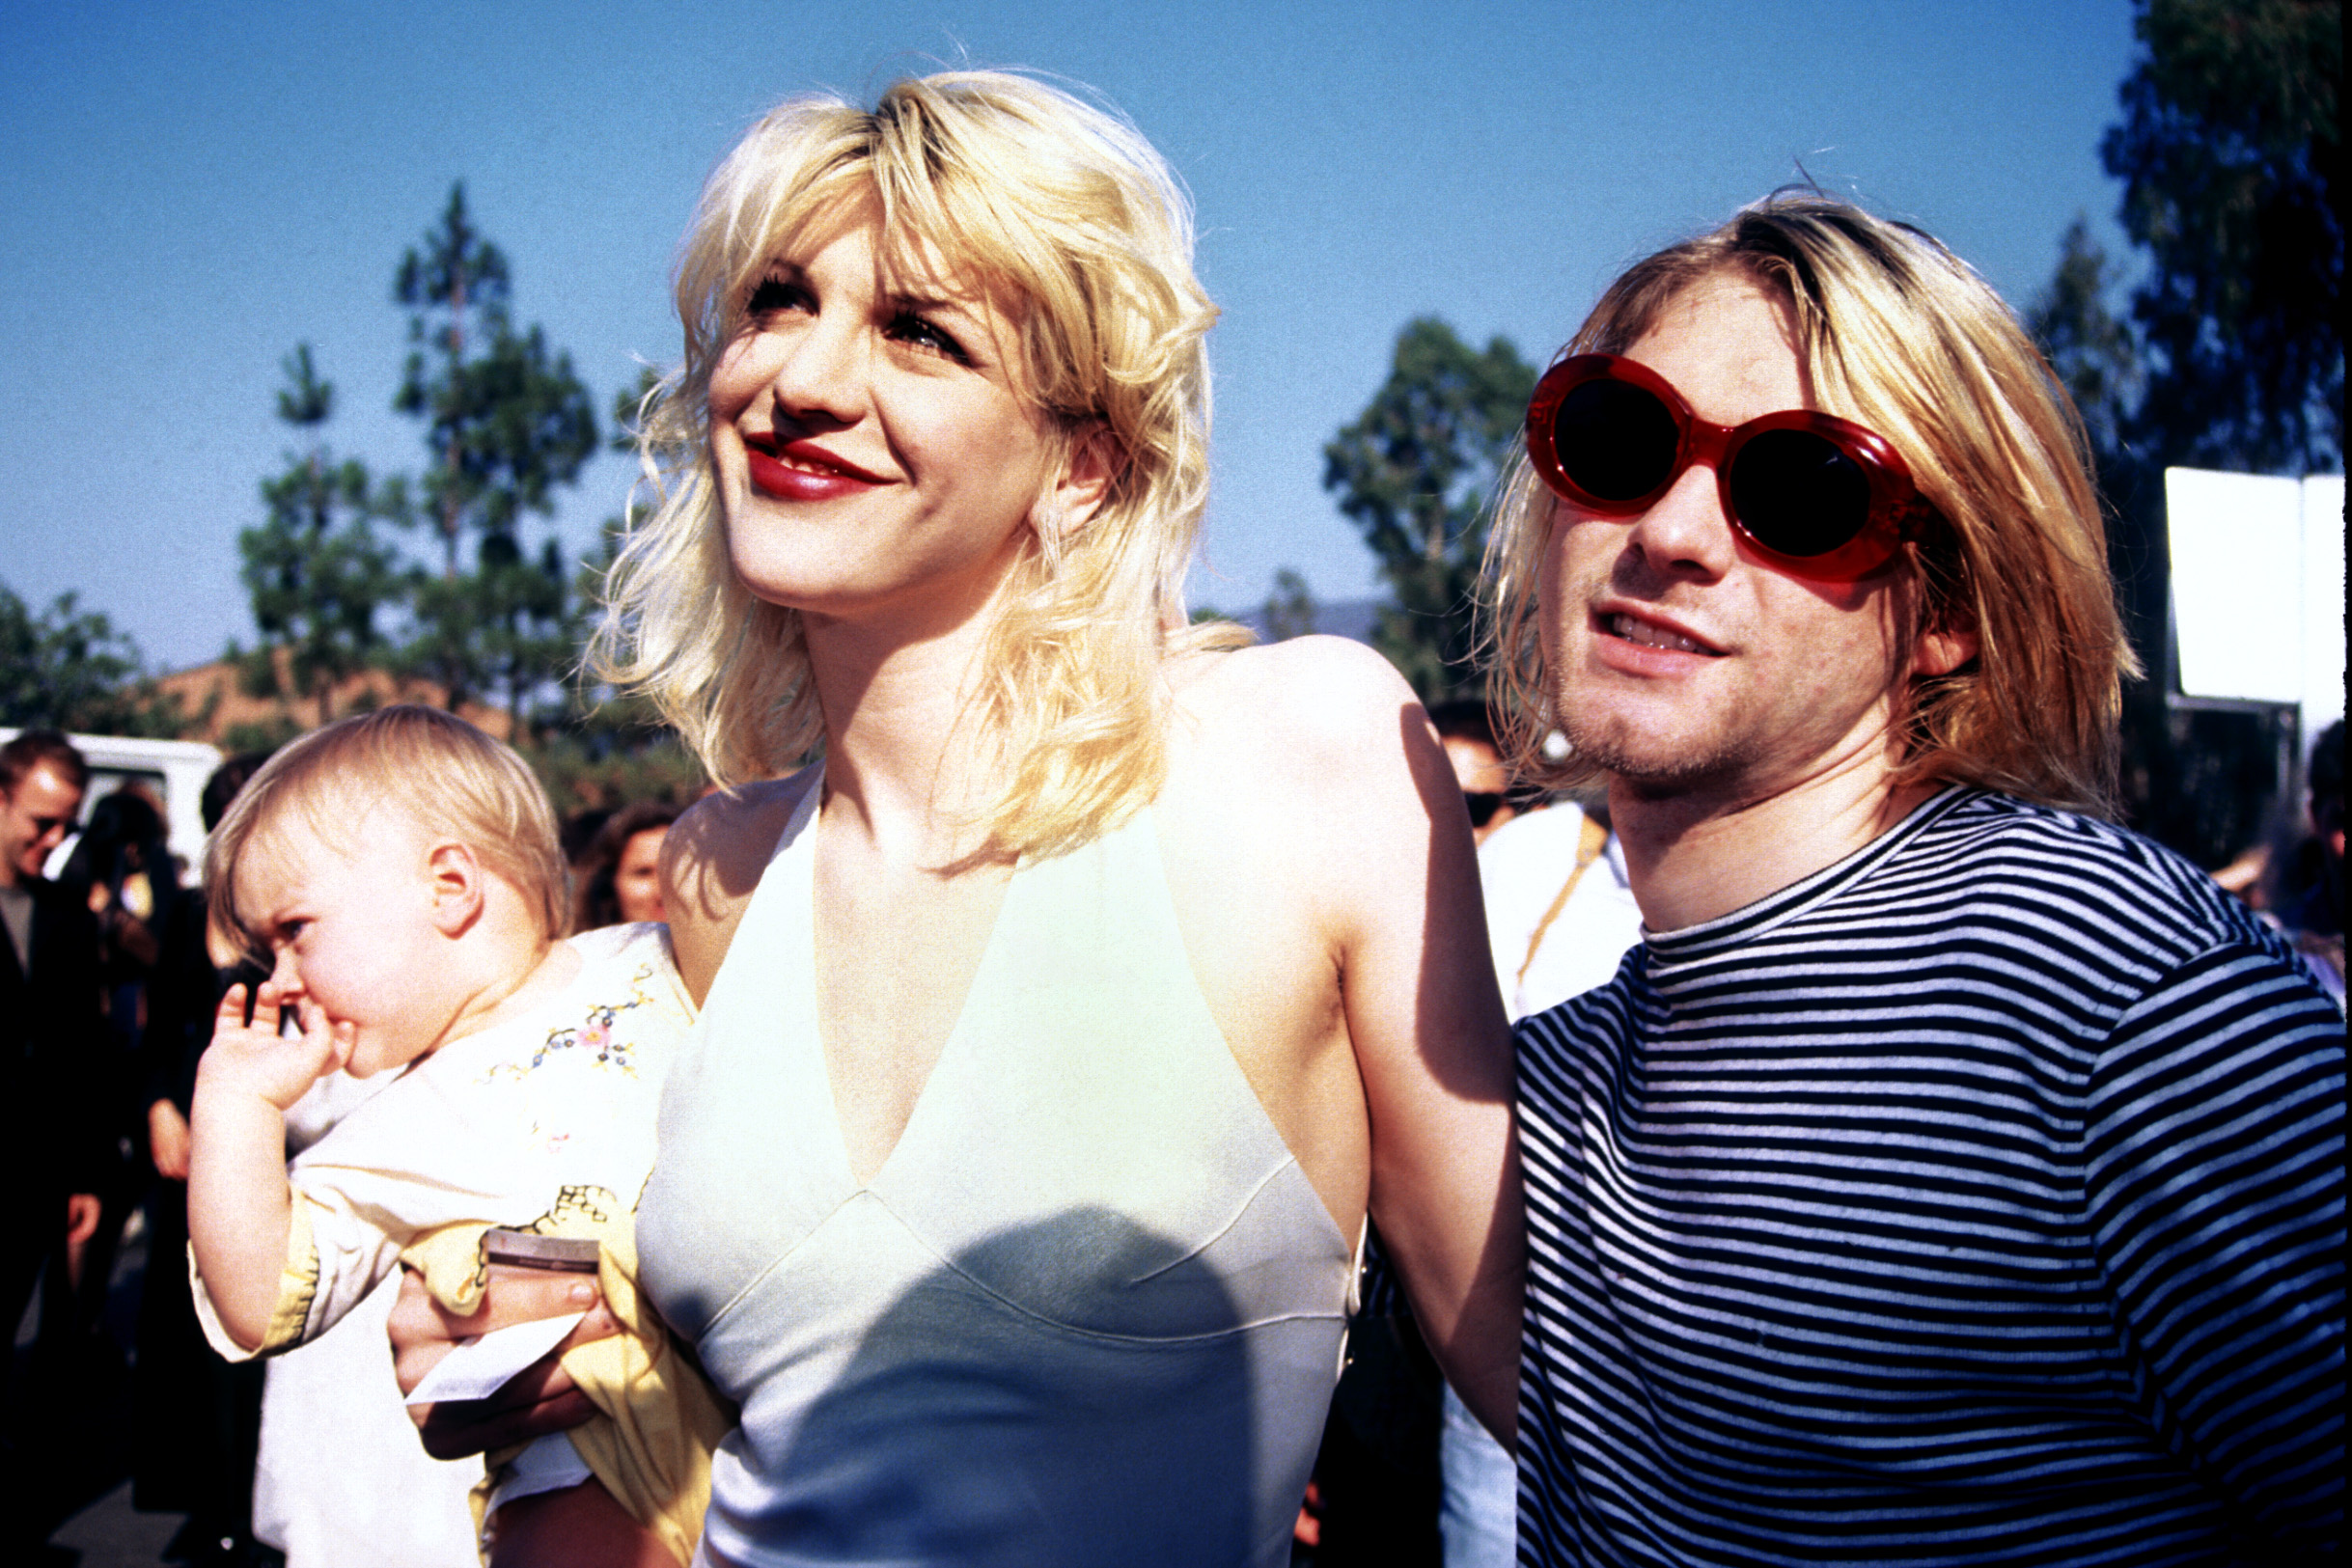 A famous singer and her late iconic rocker husband with their baby girl at the 10th Annual MTV Music Video Awards in Los Angeles, California on September 2, 1993 | Source: Getty Images